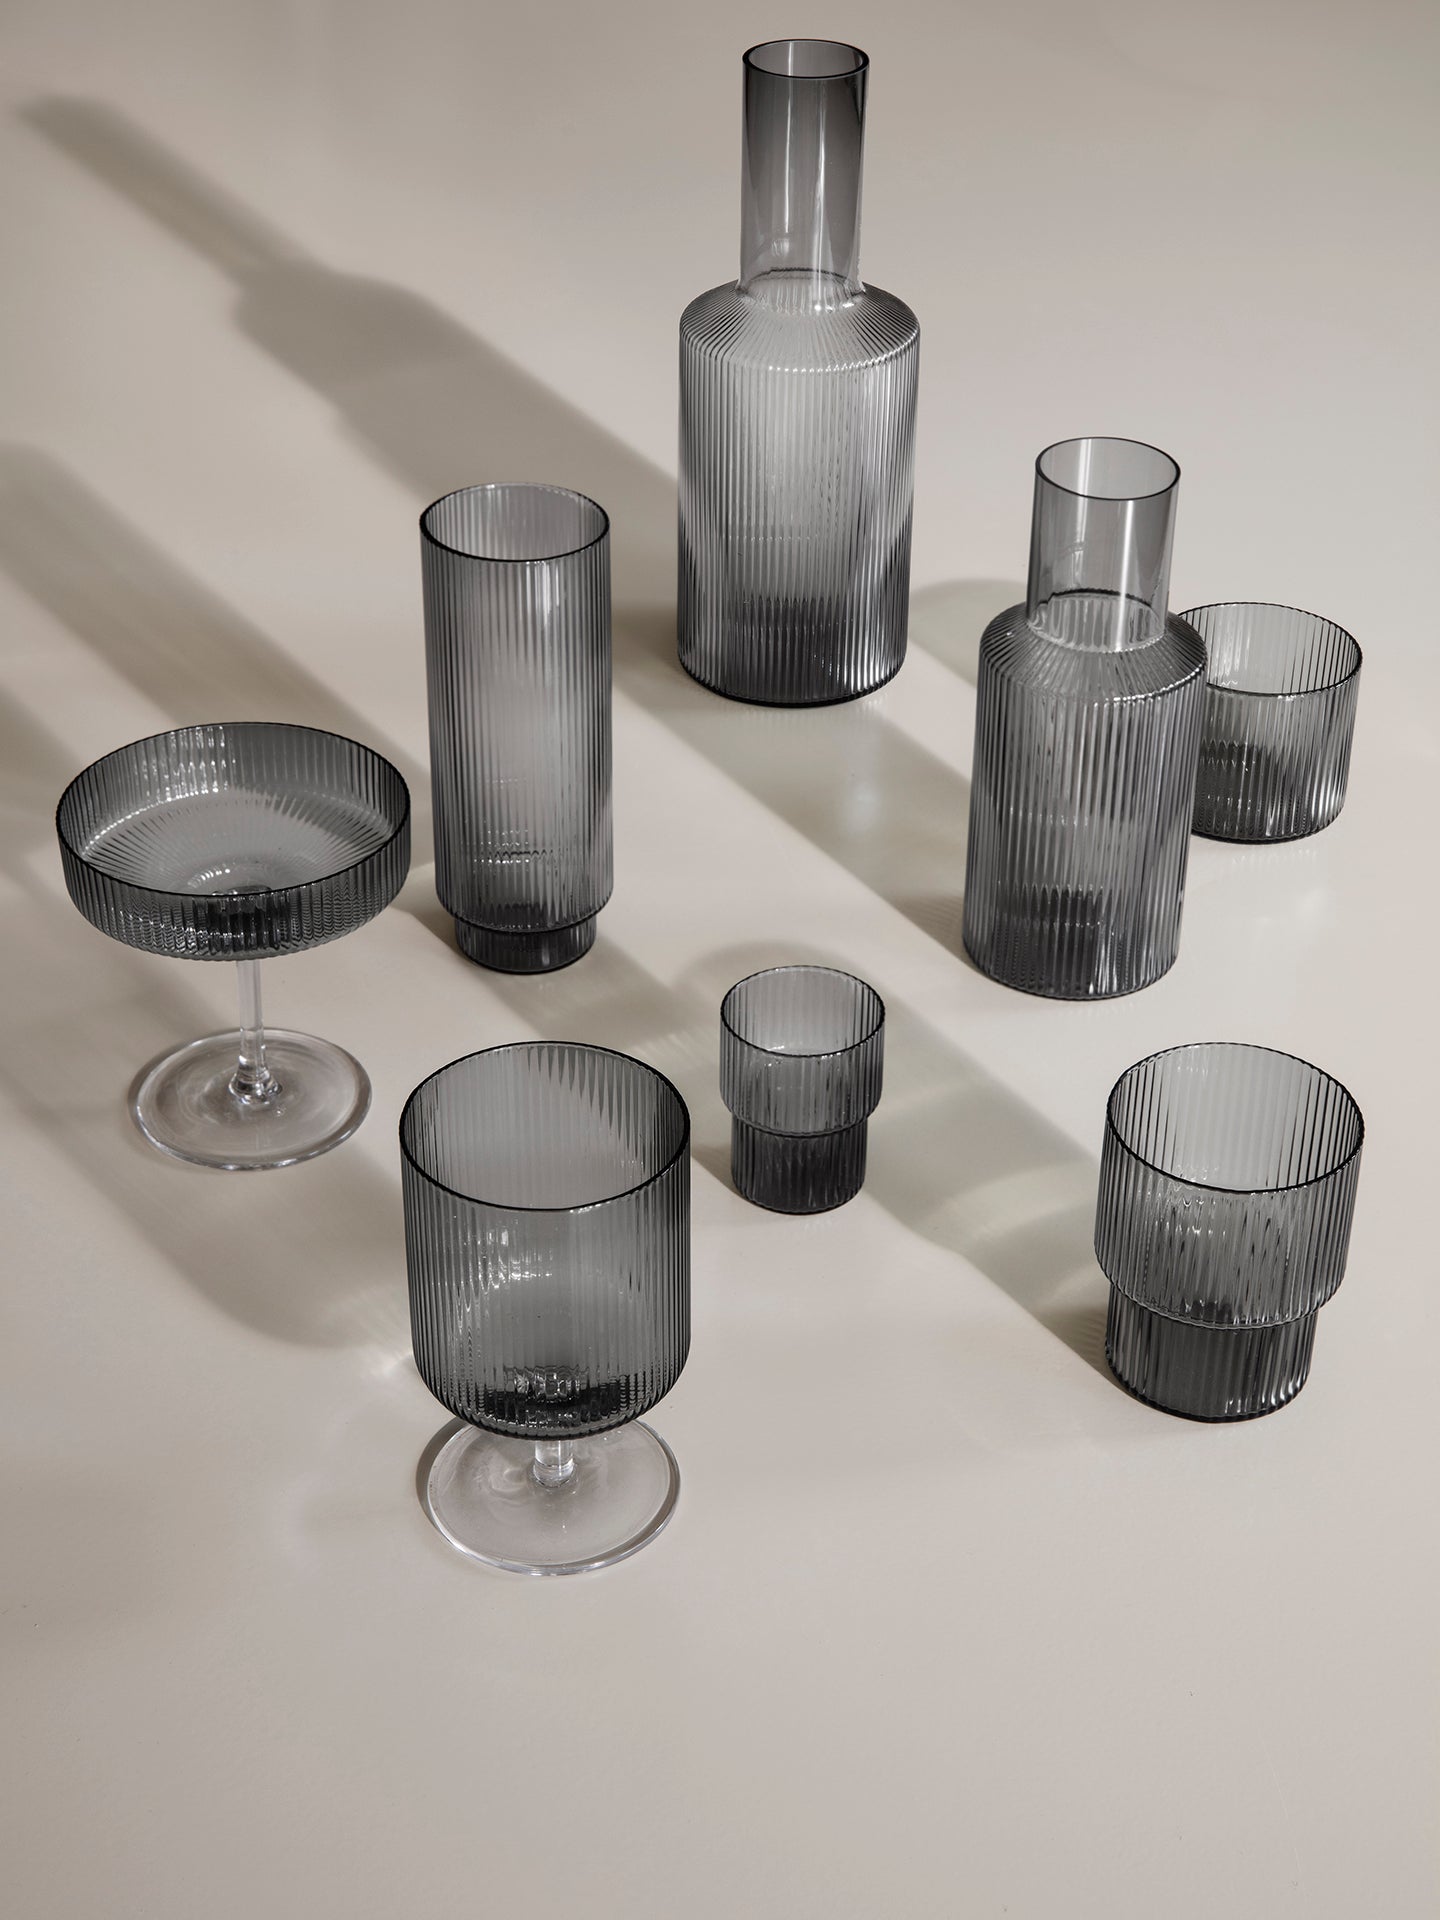 Ripple wine glasses, clear or smoked grey